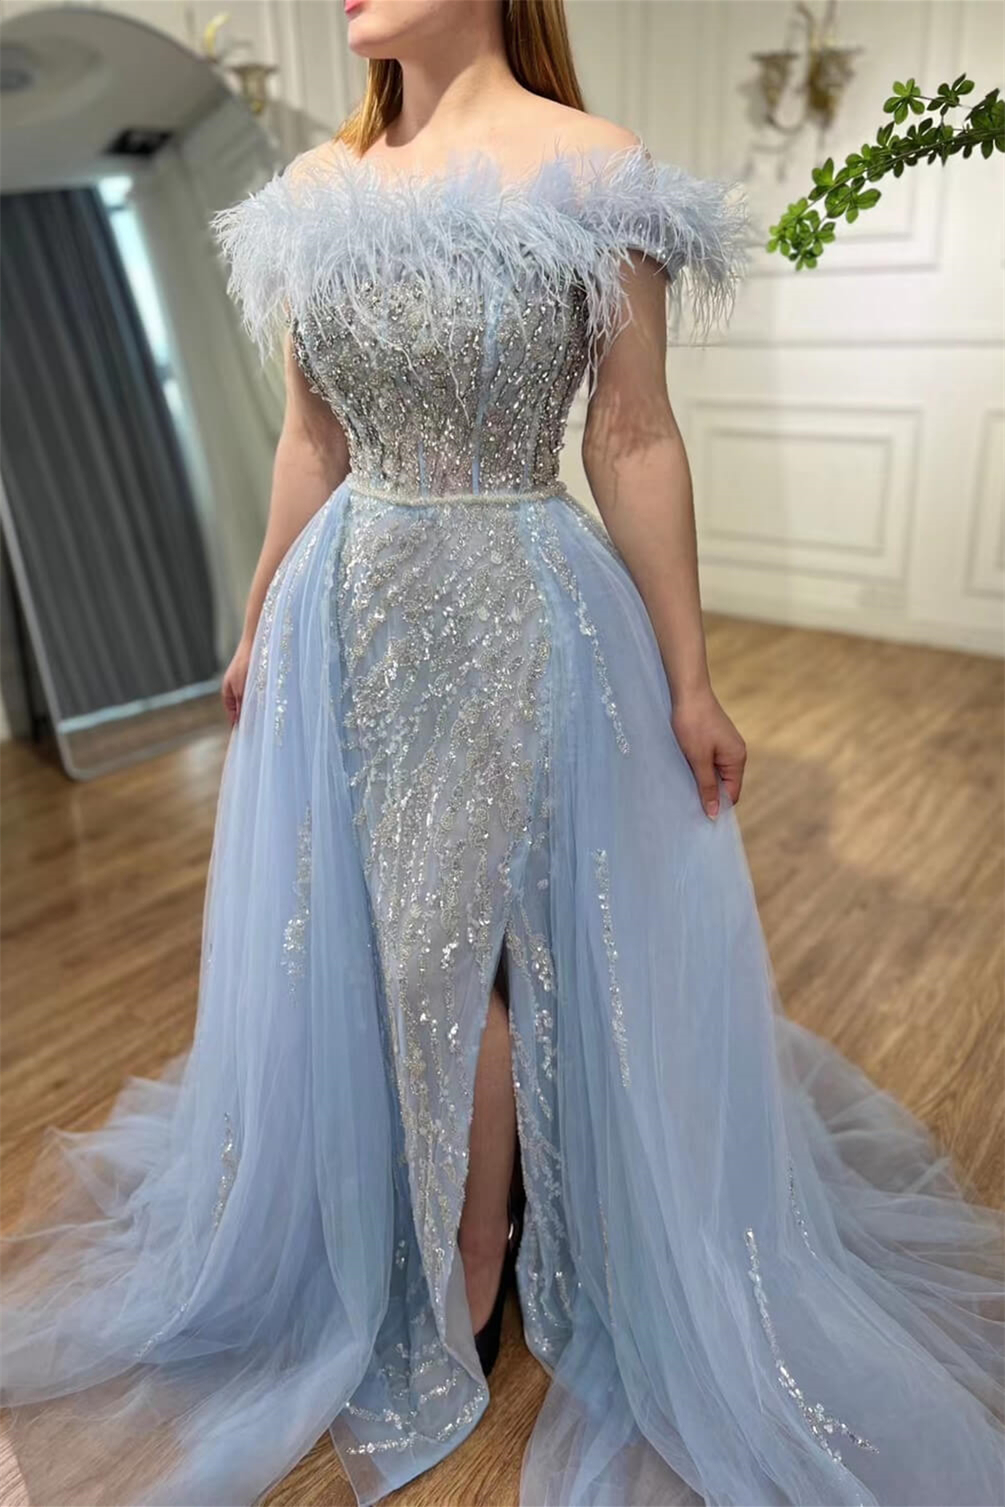 Luluslly Sky Blue Off-the-Shoulder Slit Prom Dress Mermaid Long With Beadings Feather